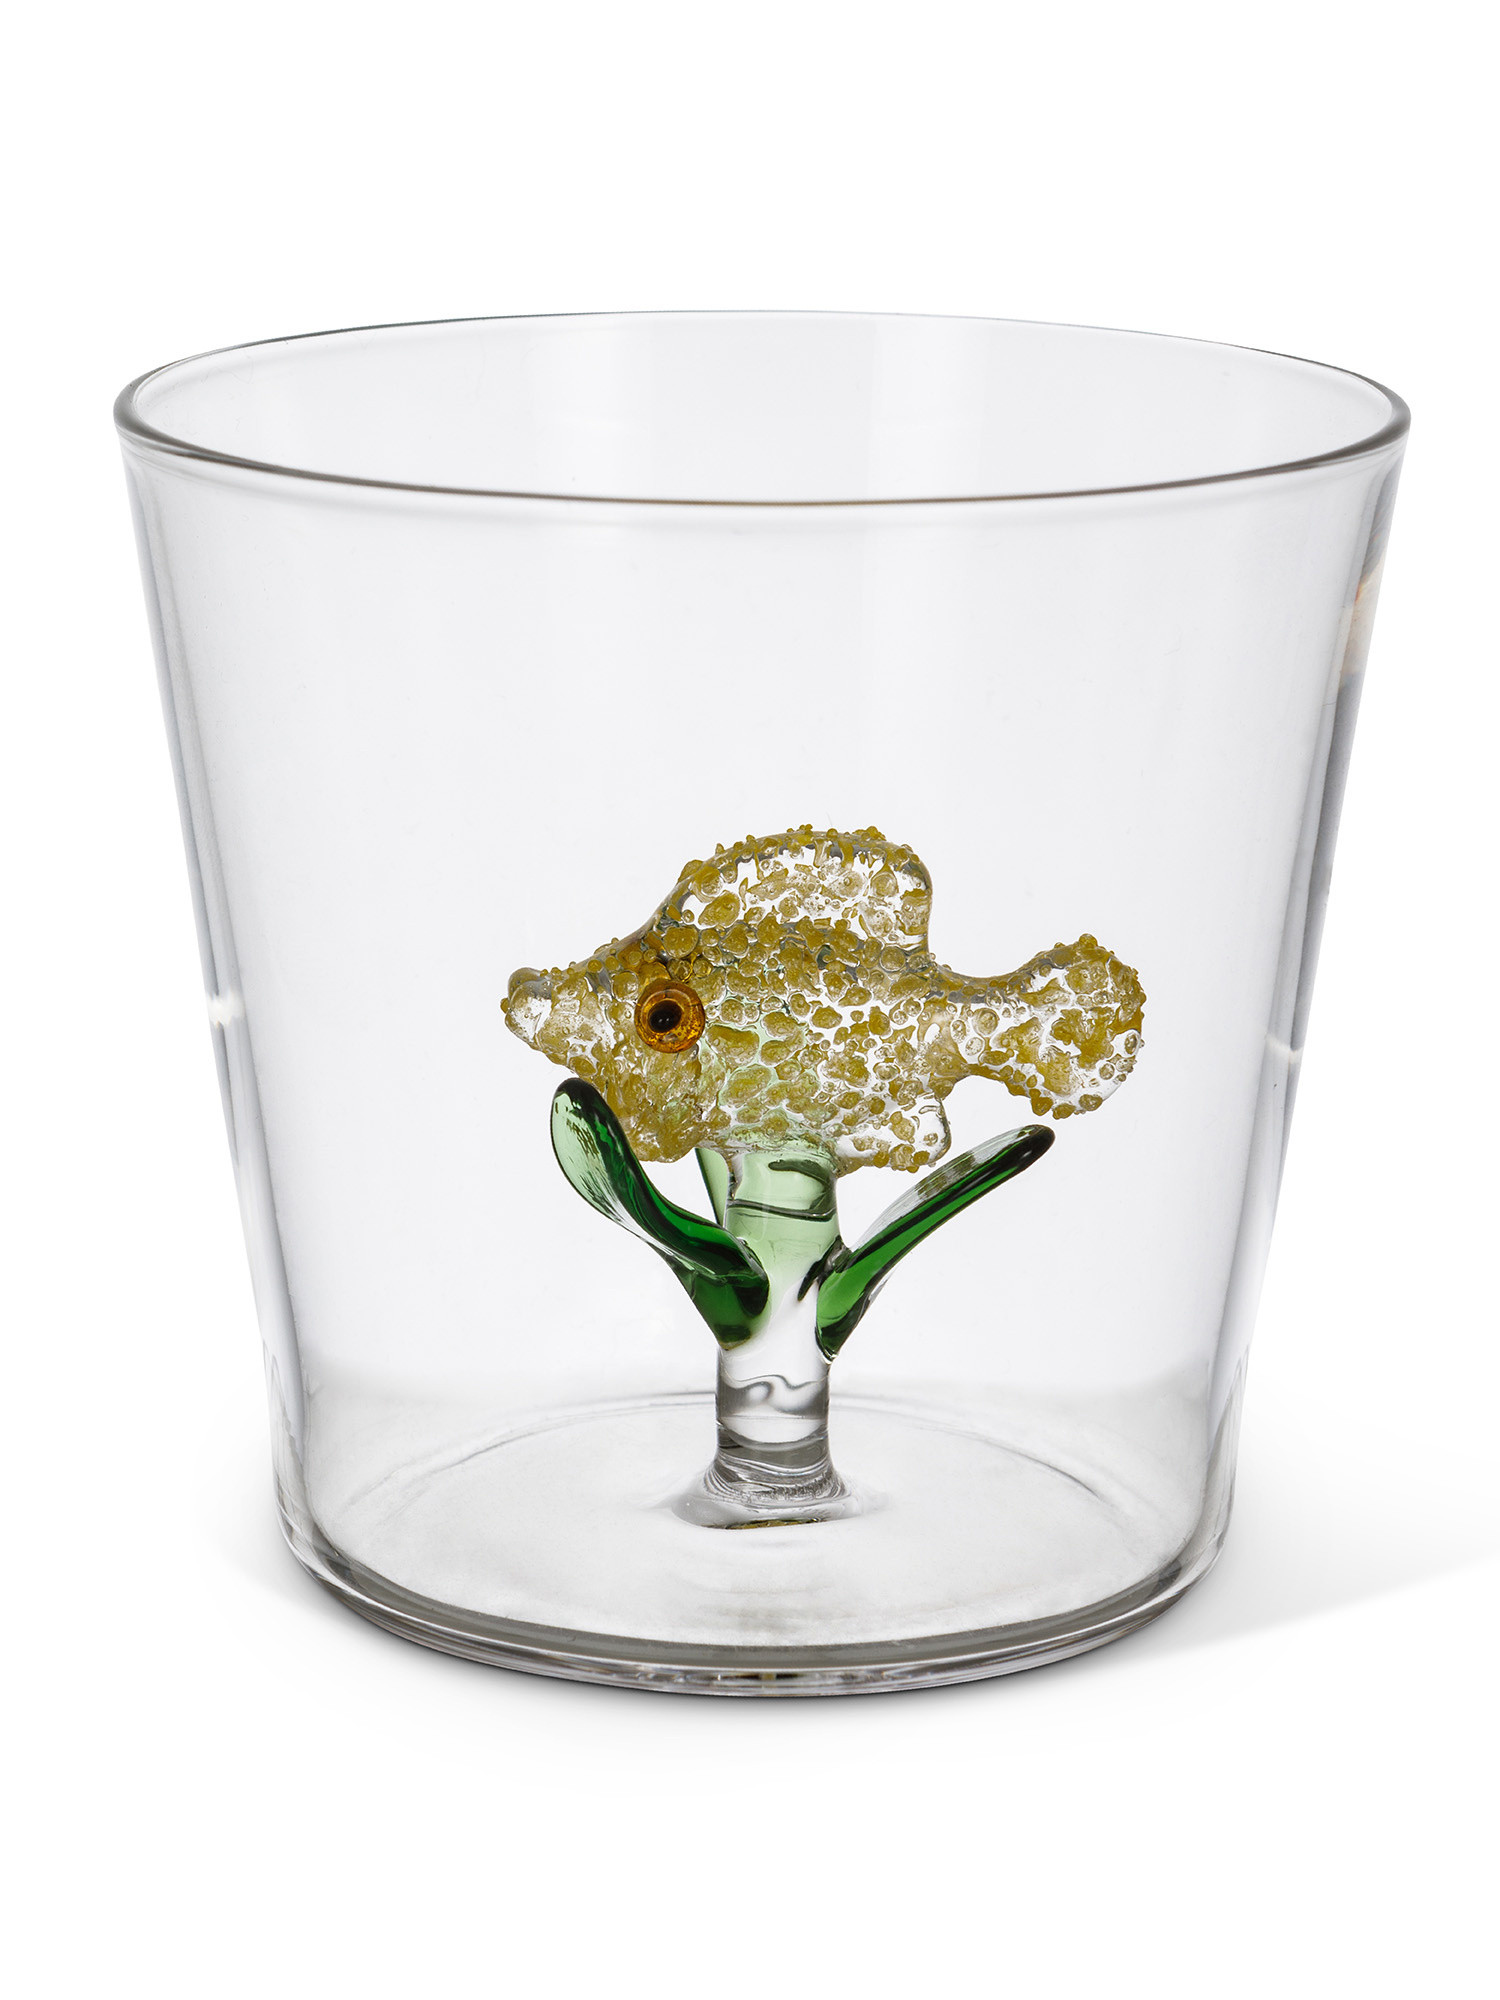 Glass tumbler with yellow fish detail, Transparent, large image number 1